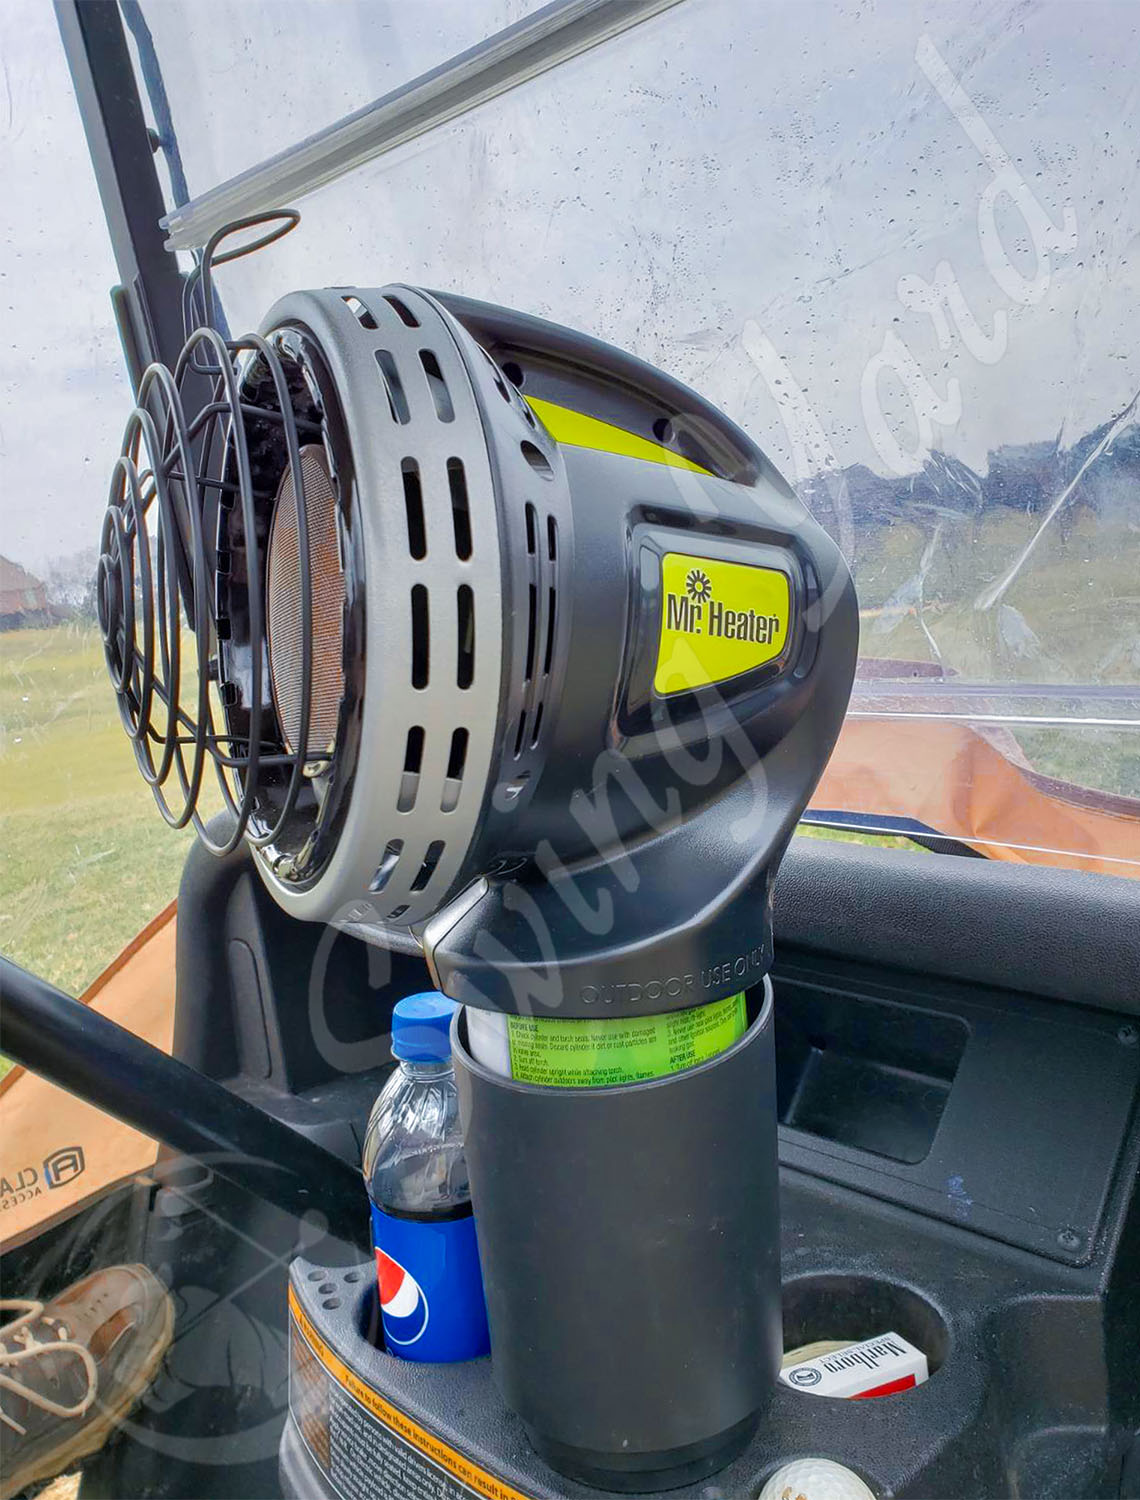 A Mr. Heater Golf Cart heater for cold weather